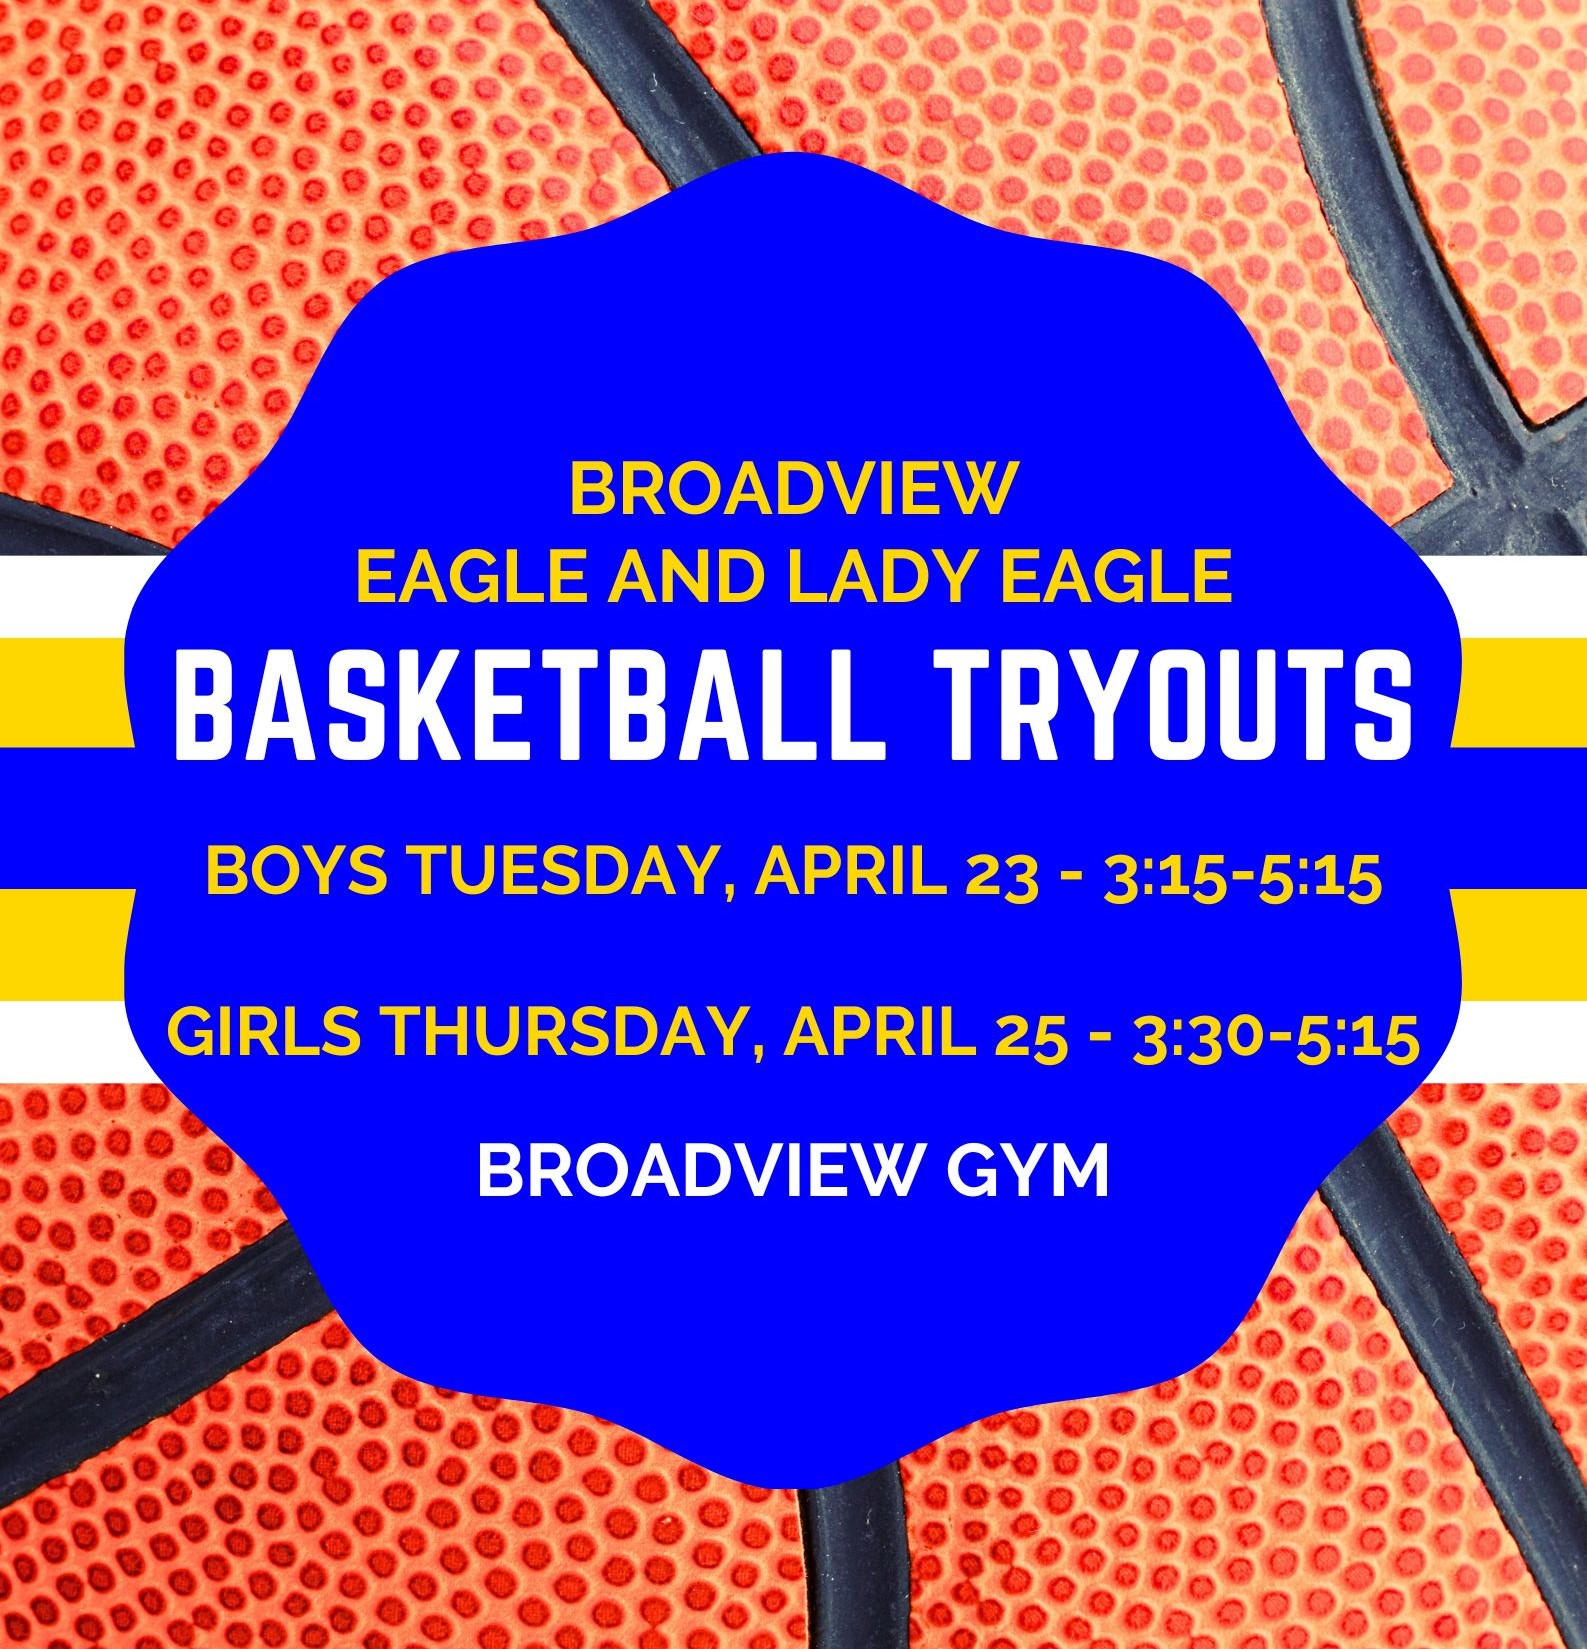 Broadview Eagle and Lady Eagle Basketball Tryouts Boys Tuesday April 23 from 3:15 to 5:00. Girls Thursday April 25 from 3:30-5:00. Both tryouts are in the Broadview Gym.